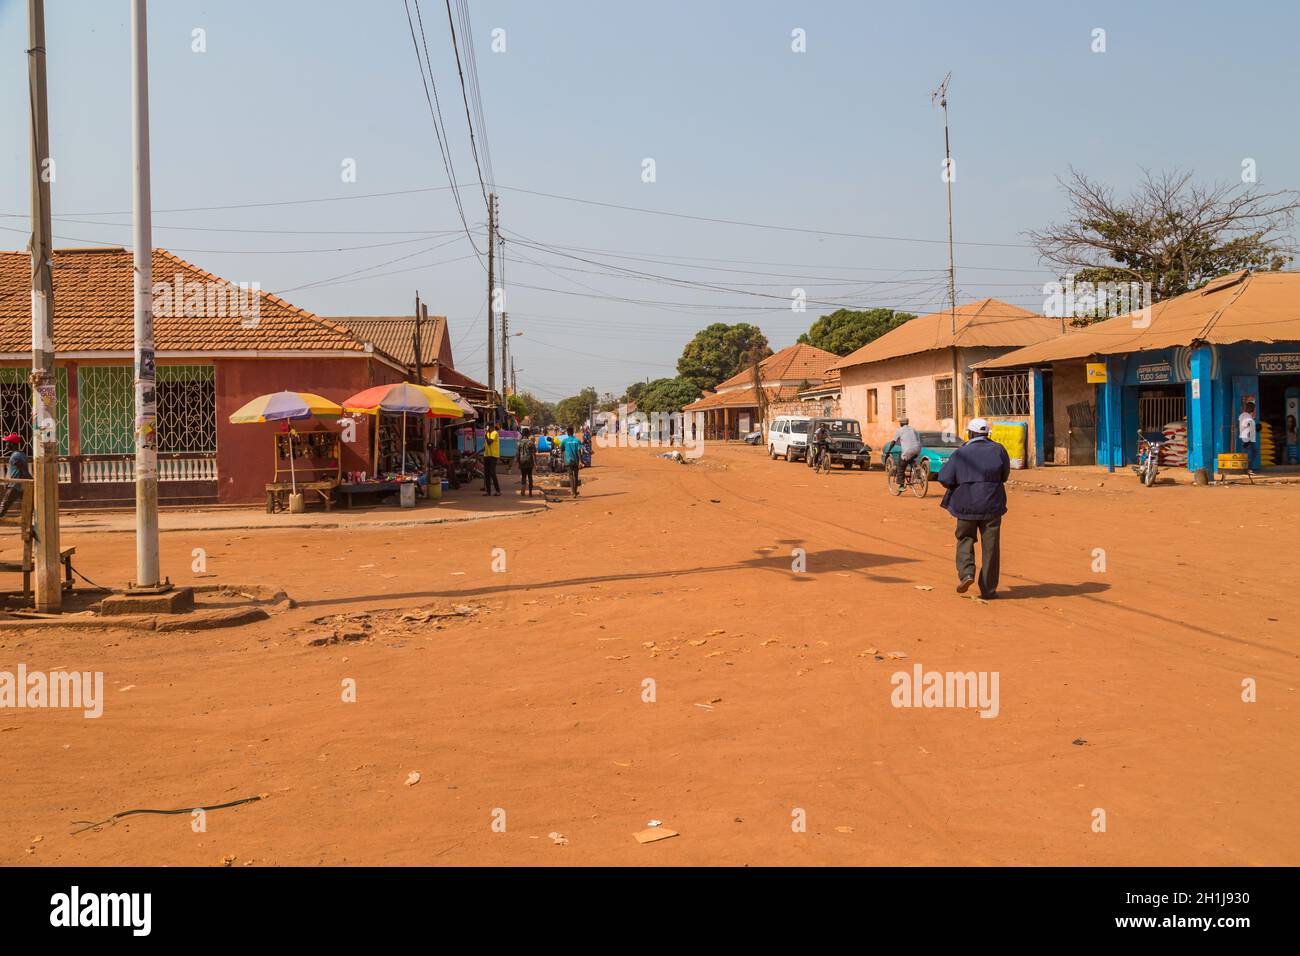 Bissau, Republic of Guinea-Bissau - January 6, 2020: Street scene in the city of Bissau with people at the street, Guinea Bissau Stock Photo